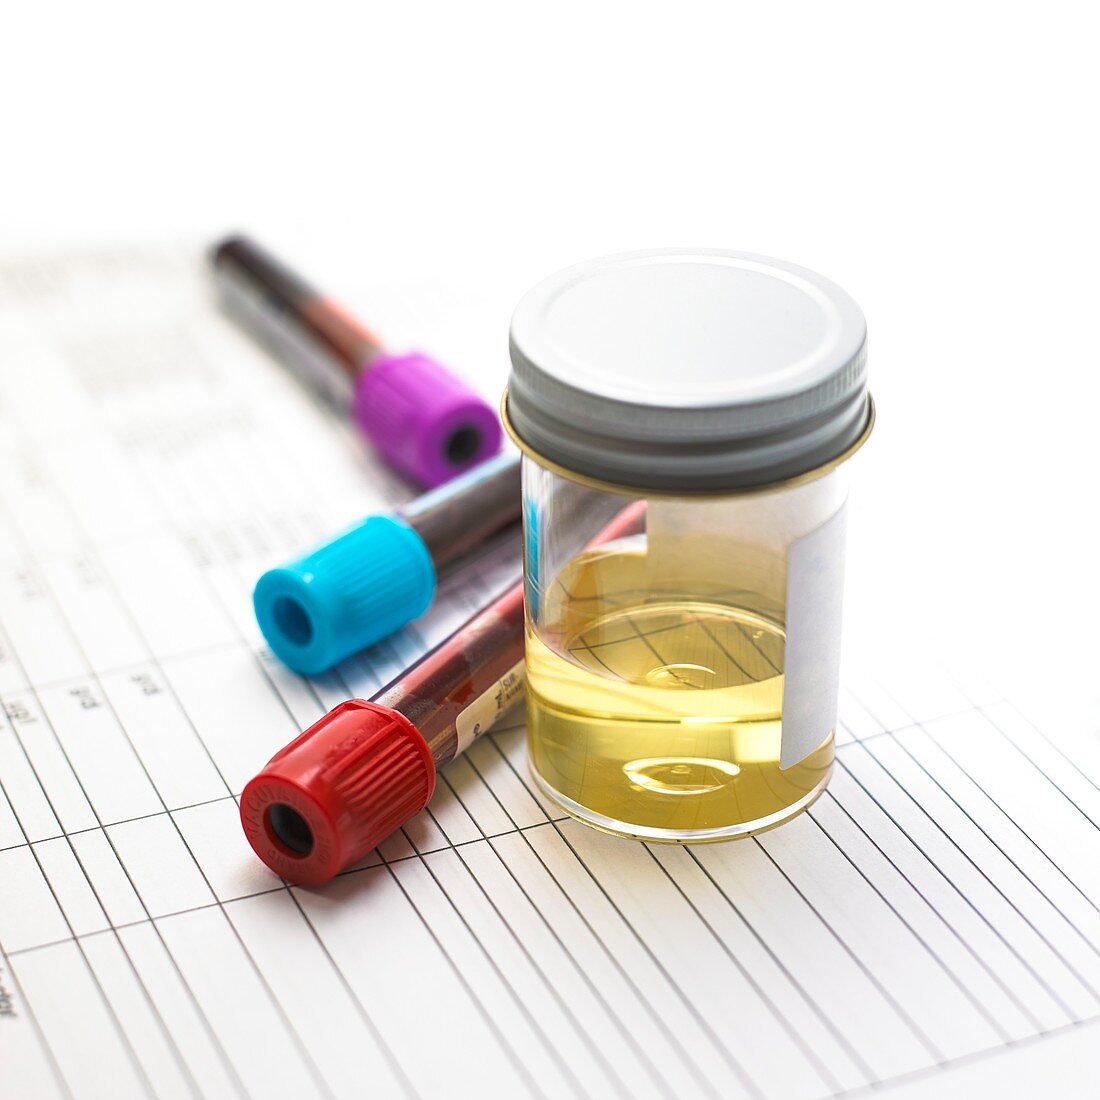 Urine and blood samples